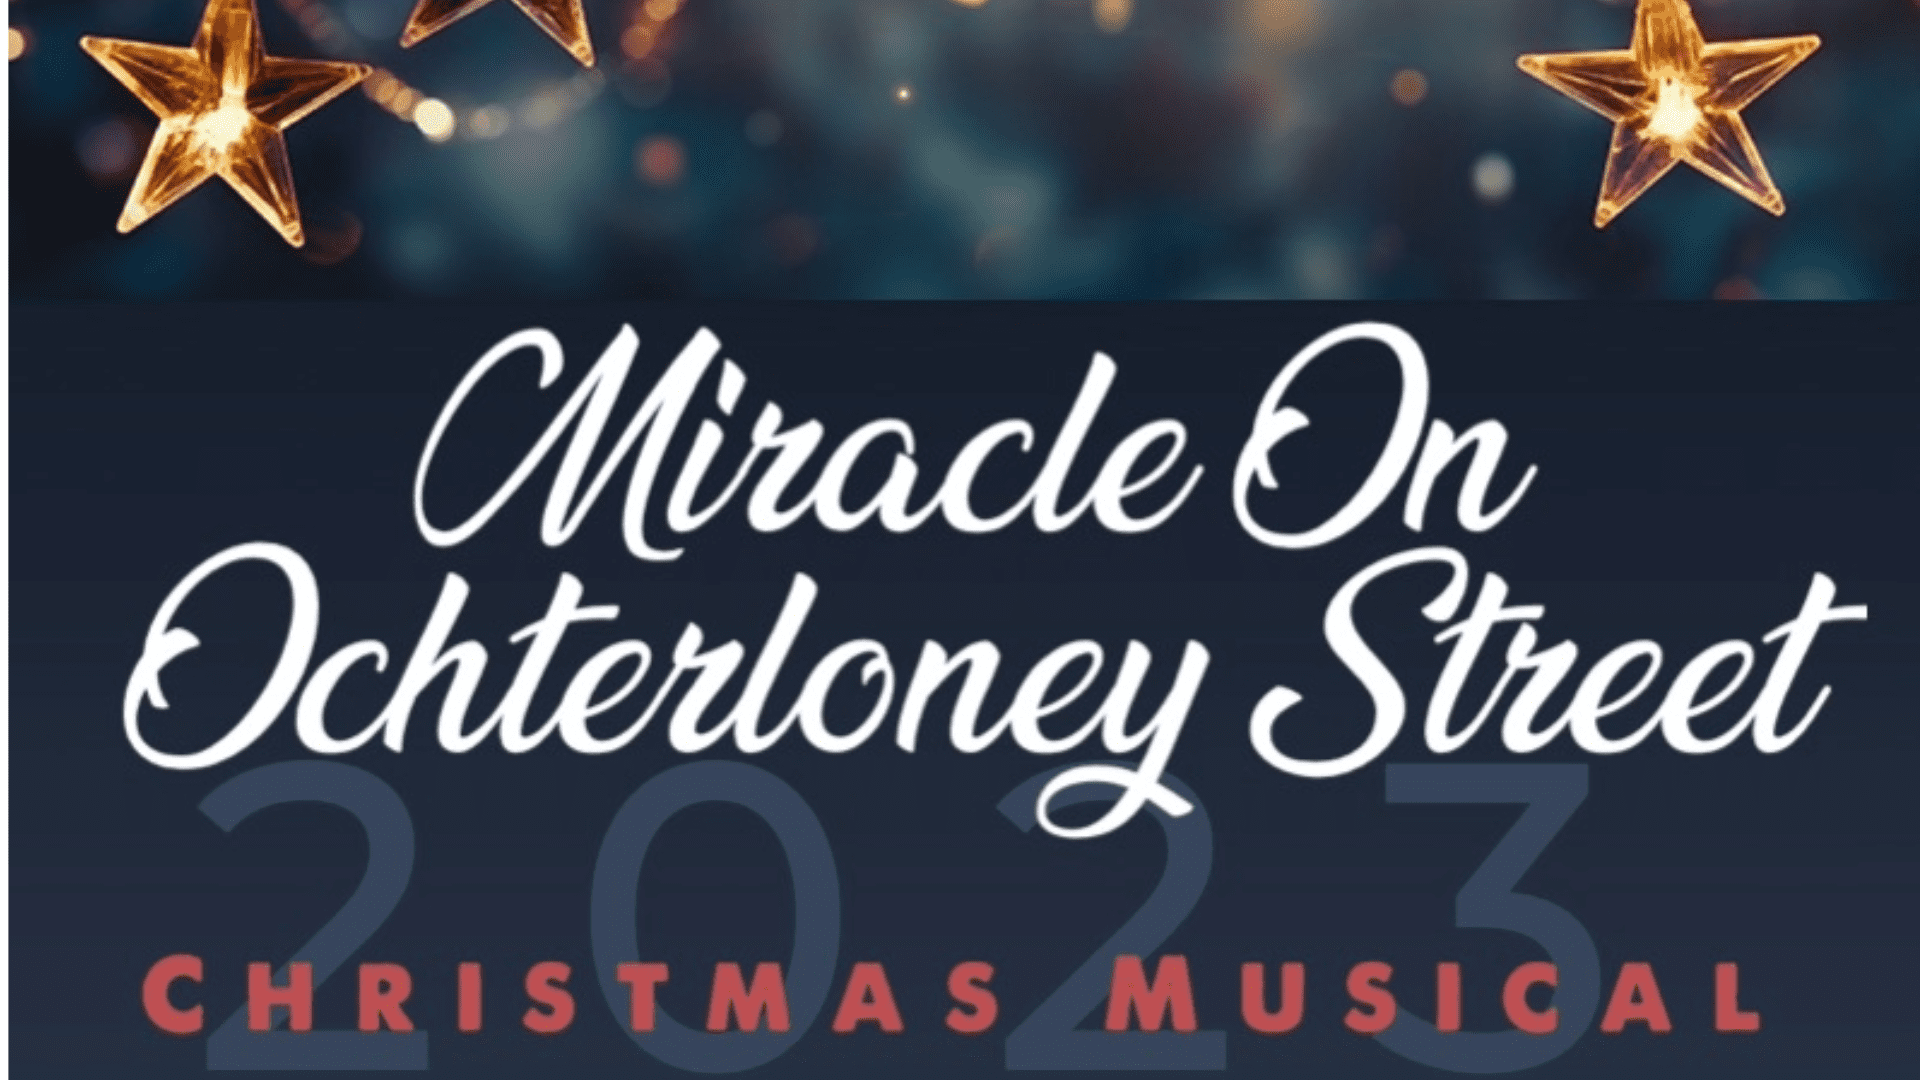 “Miracle on Ochterloney Street”: A Heartwarming Christmas Musical for the Whole Family!